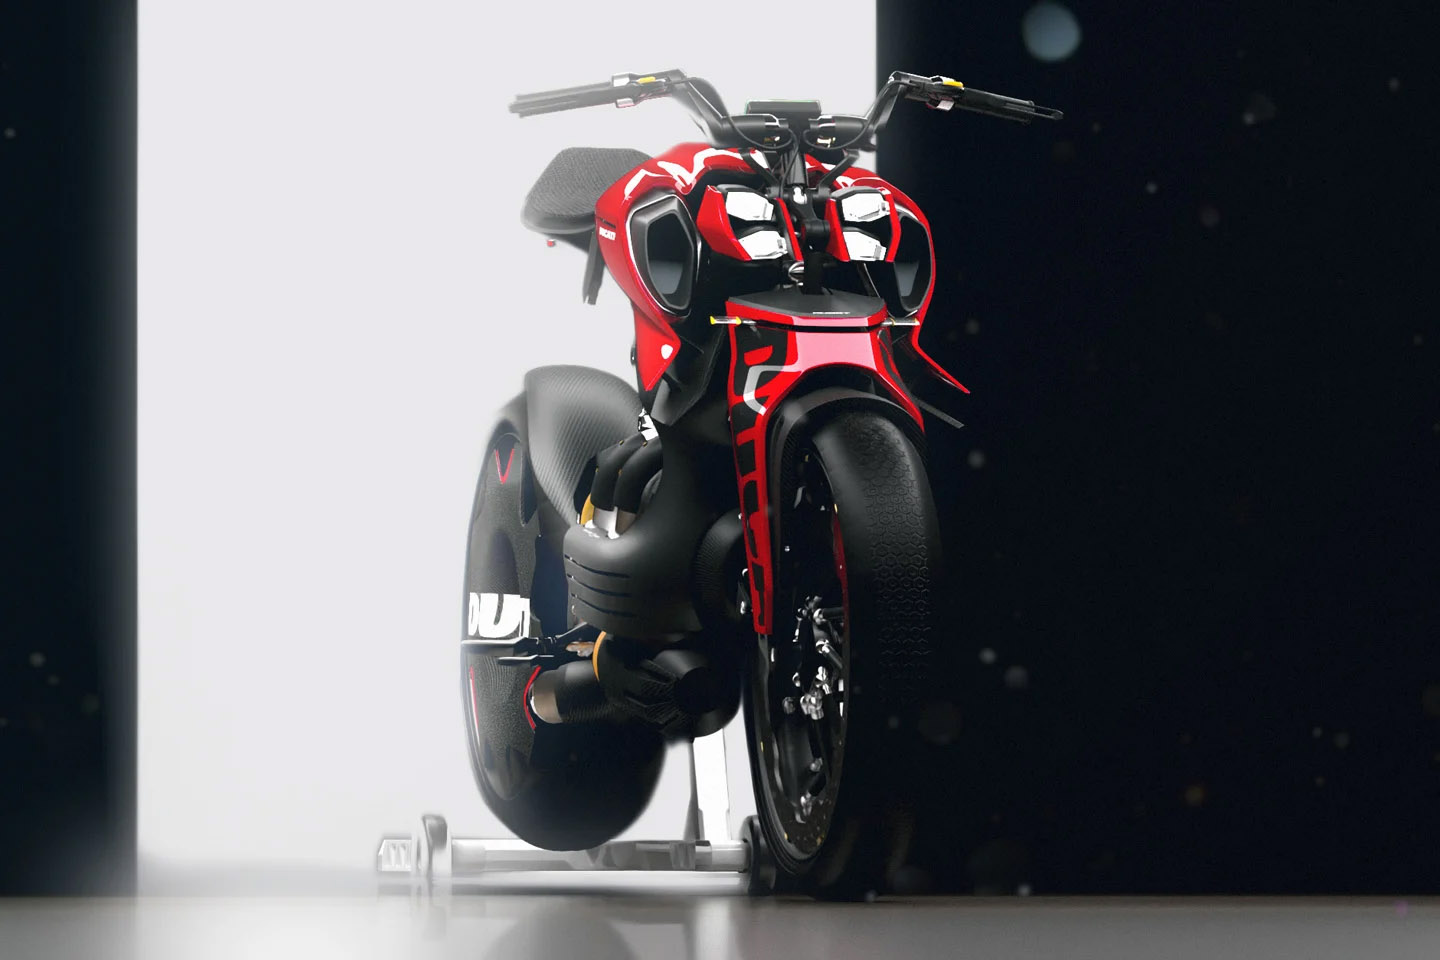 #Top 10 motorbike designs to satisfy your need for speed